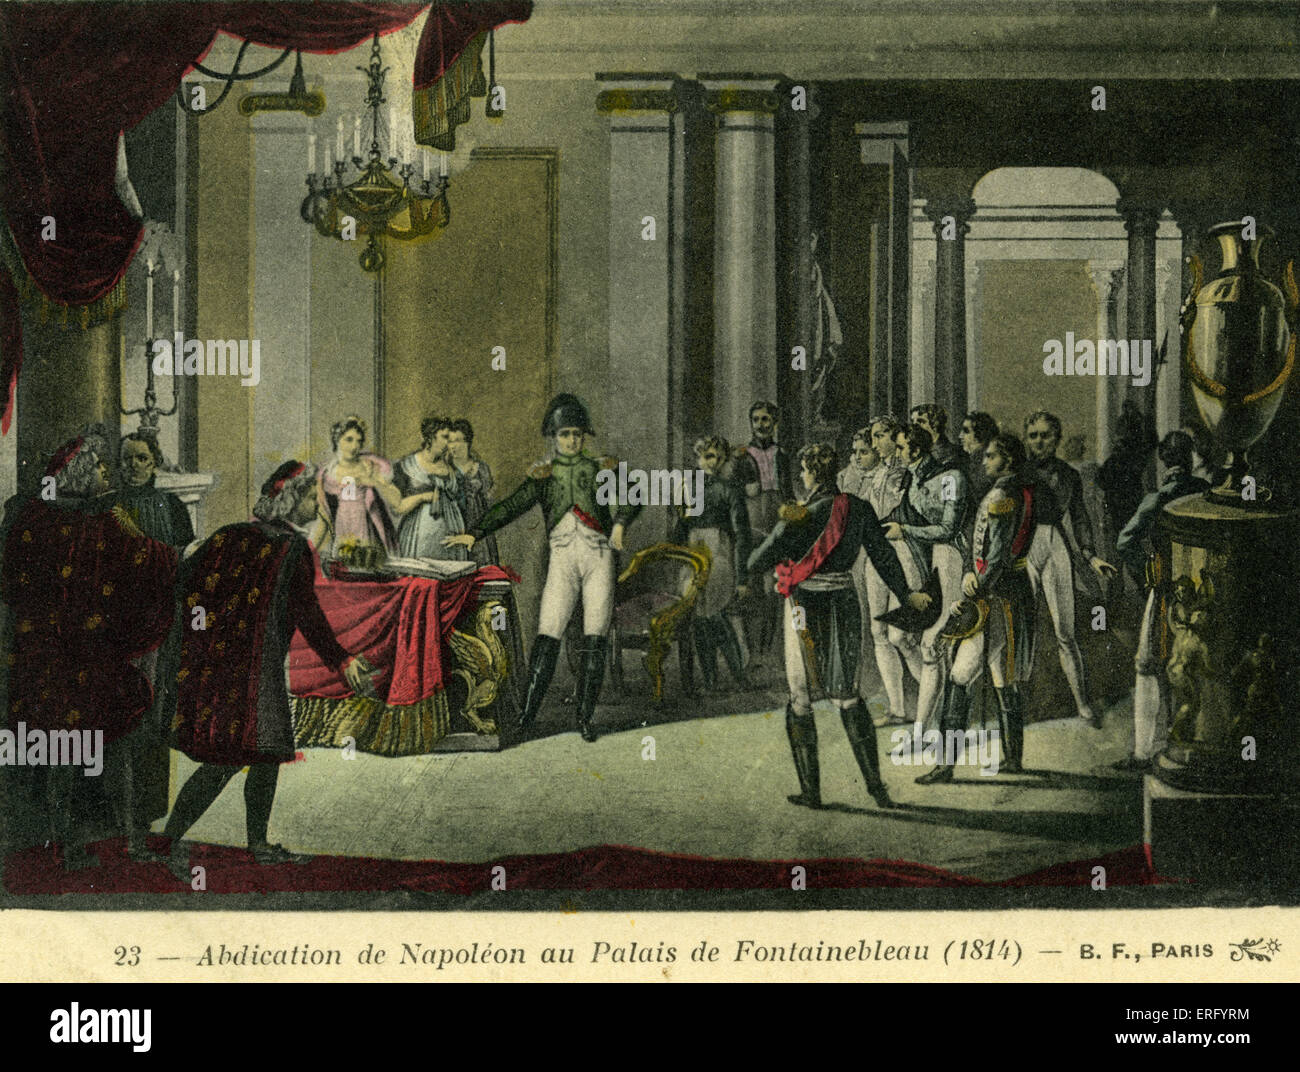 Napoleon 's abdication at the Palace of Fontainebleau in 1814. Treaty of Fontainebleau  - agreement  made on 11 April 1814 Stock Photo